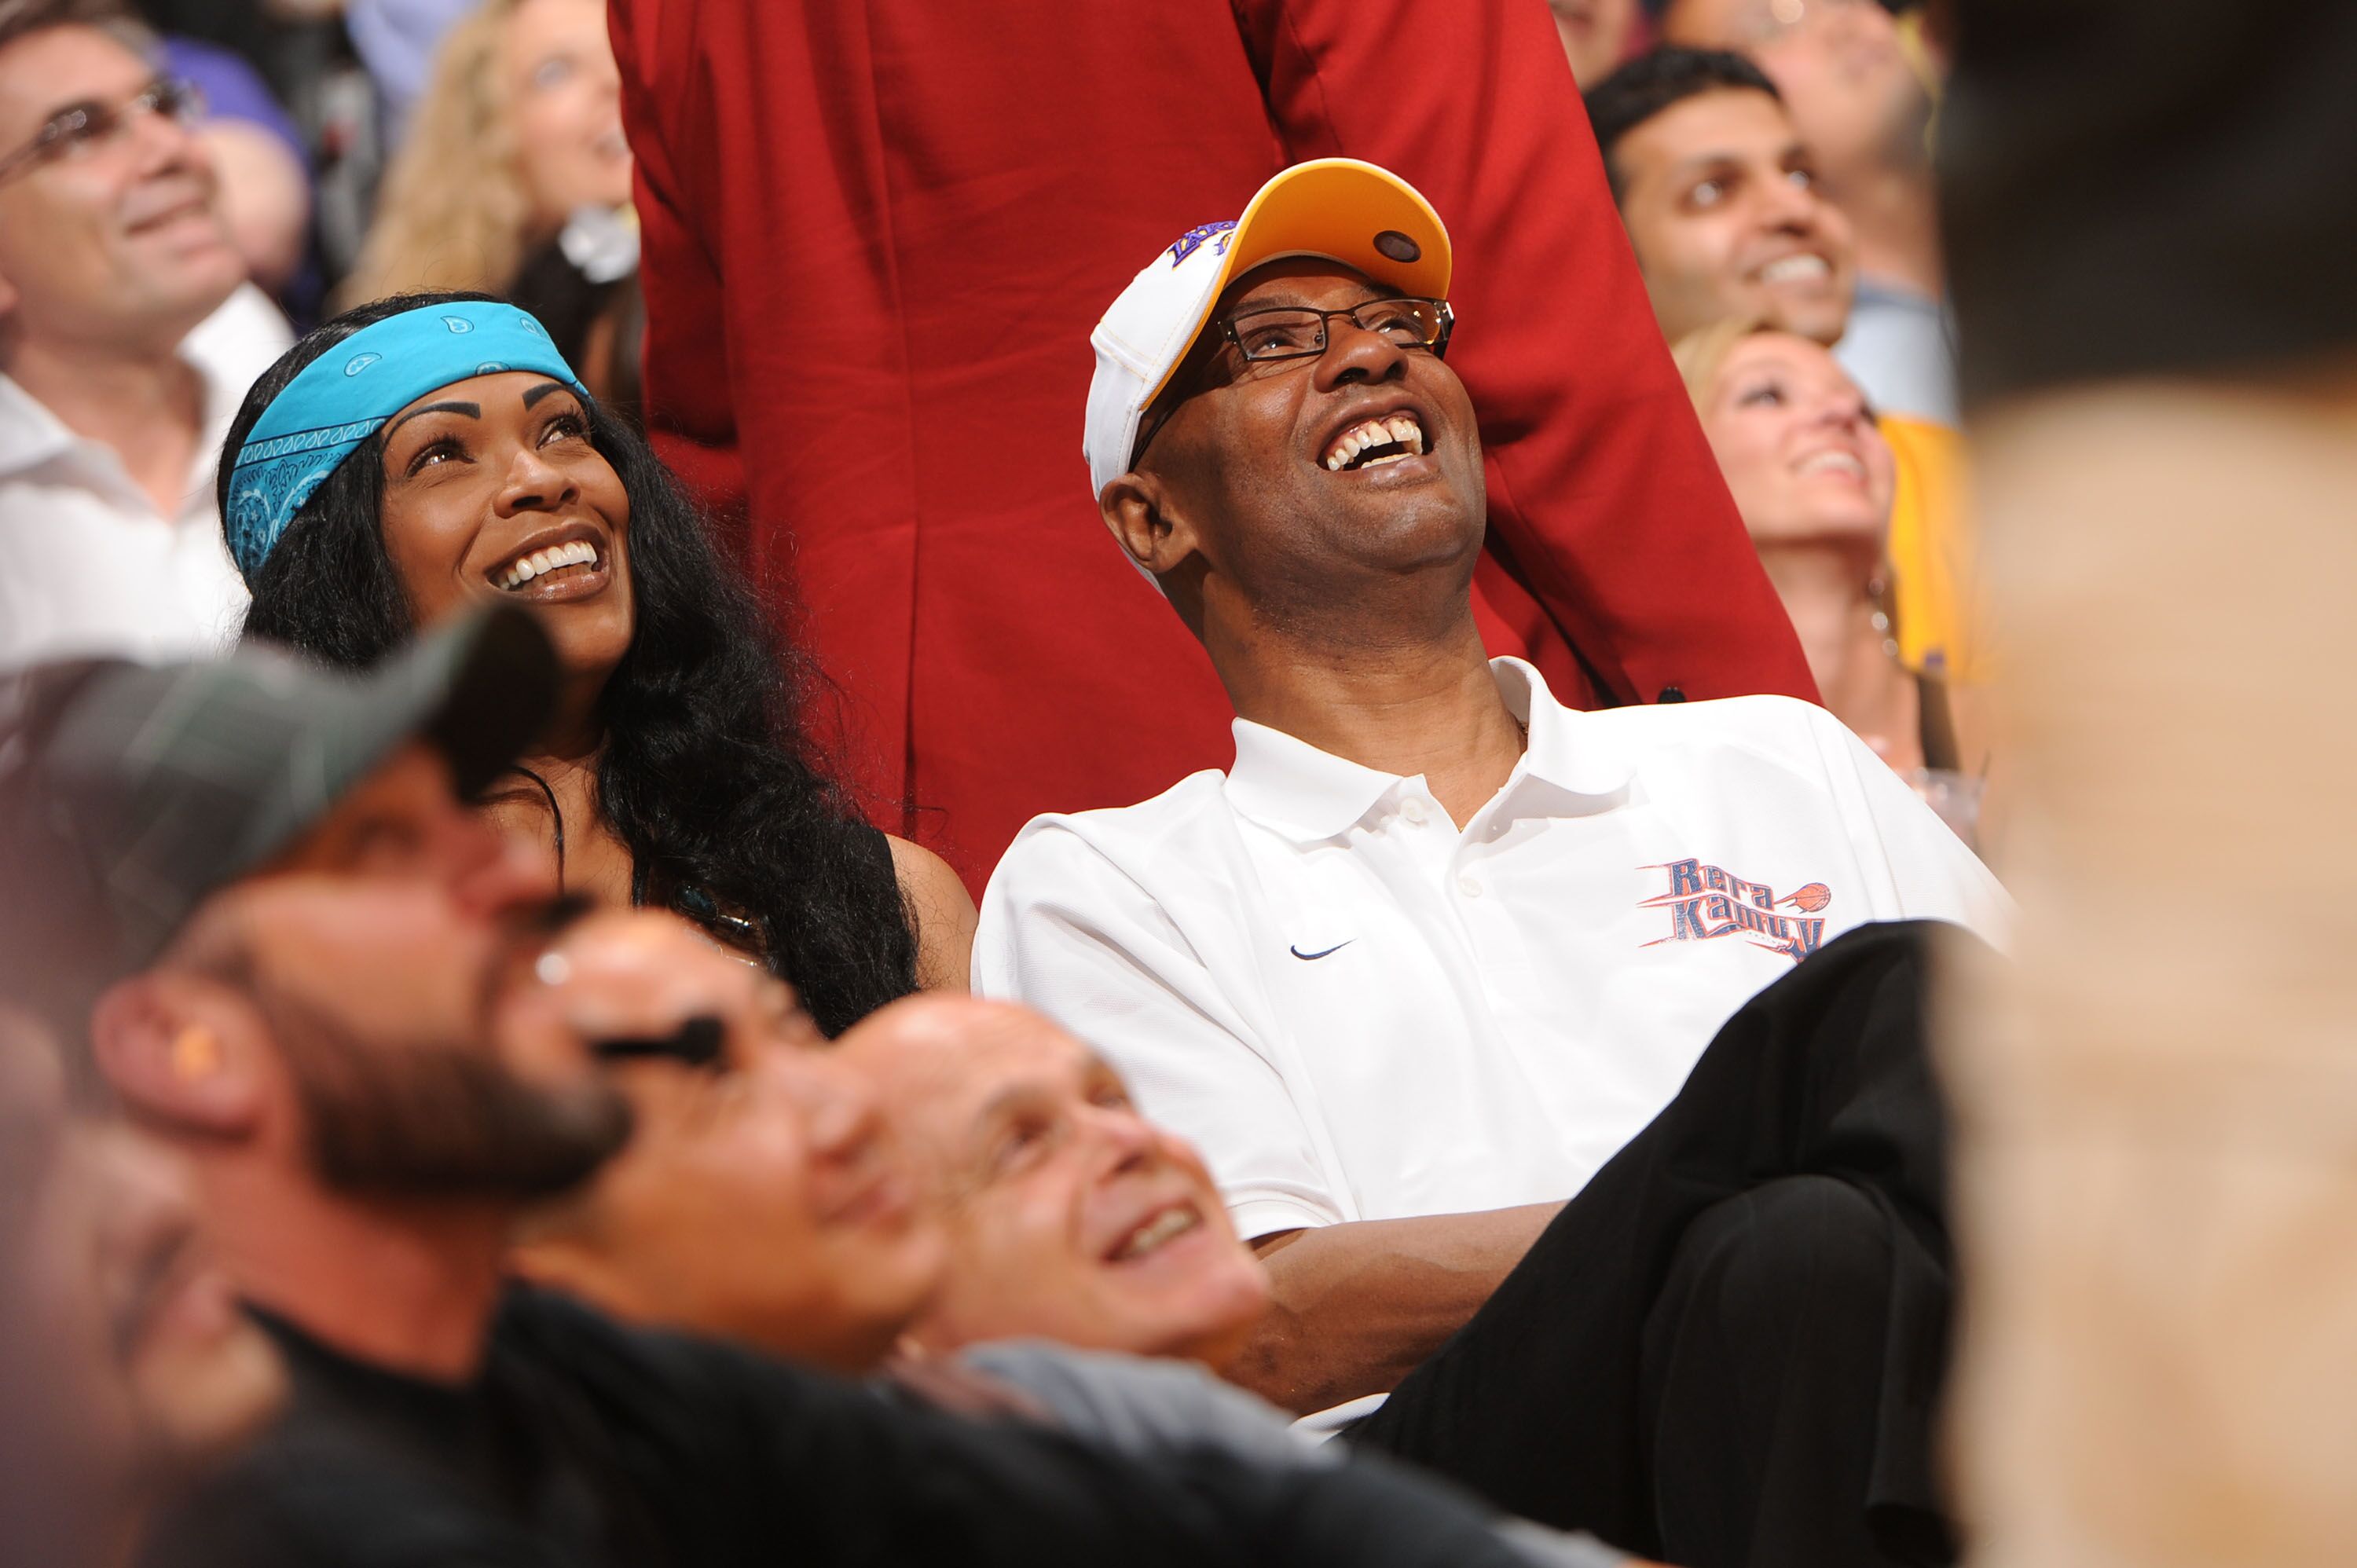 Pam and Joe Bryant, parents of Kobe Bryant #24 of the Los Angeles Lakers, attend a game between the Oklahoma City Thunder and the Los Angeles Lakers in Game Five of the Western Conference Quarterfinals. | Source: Getty Images